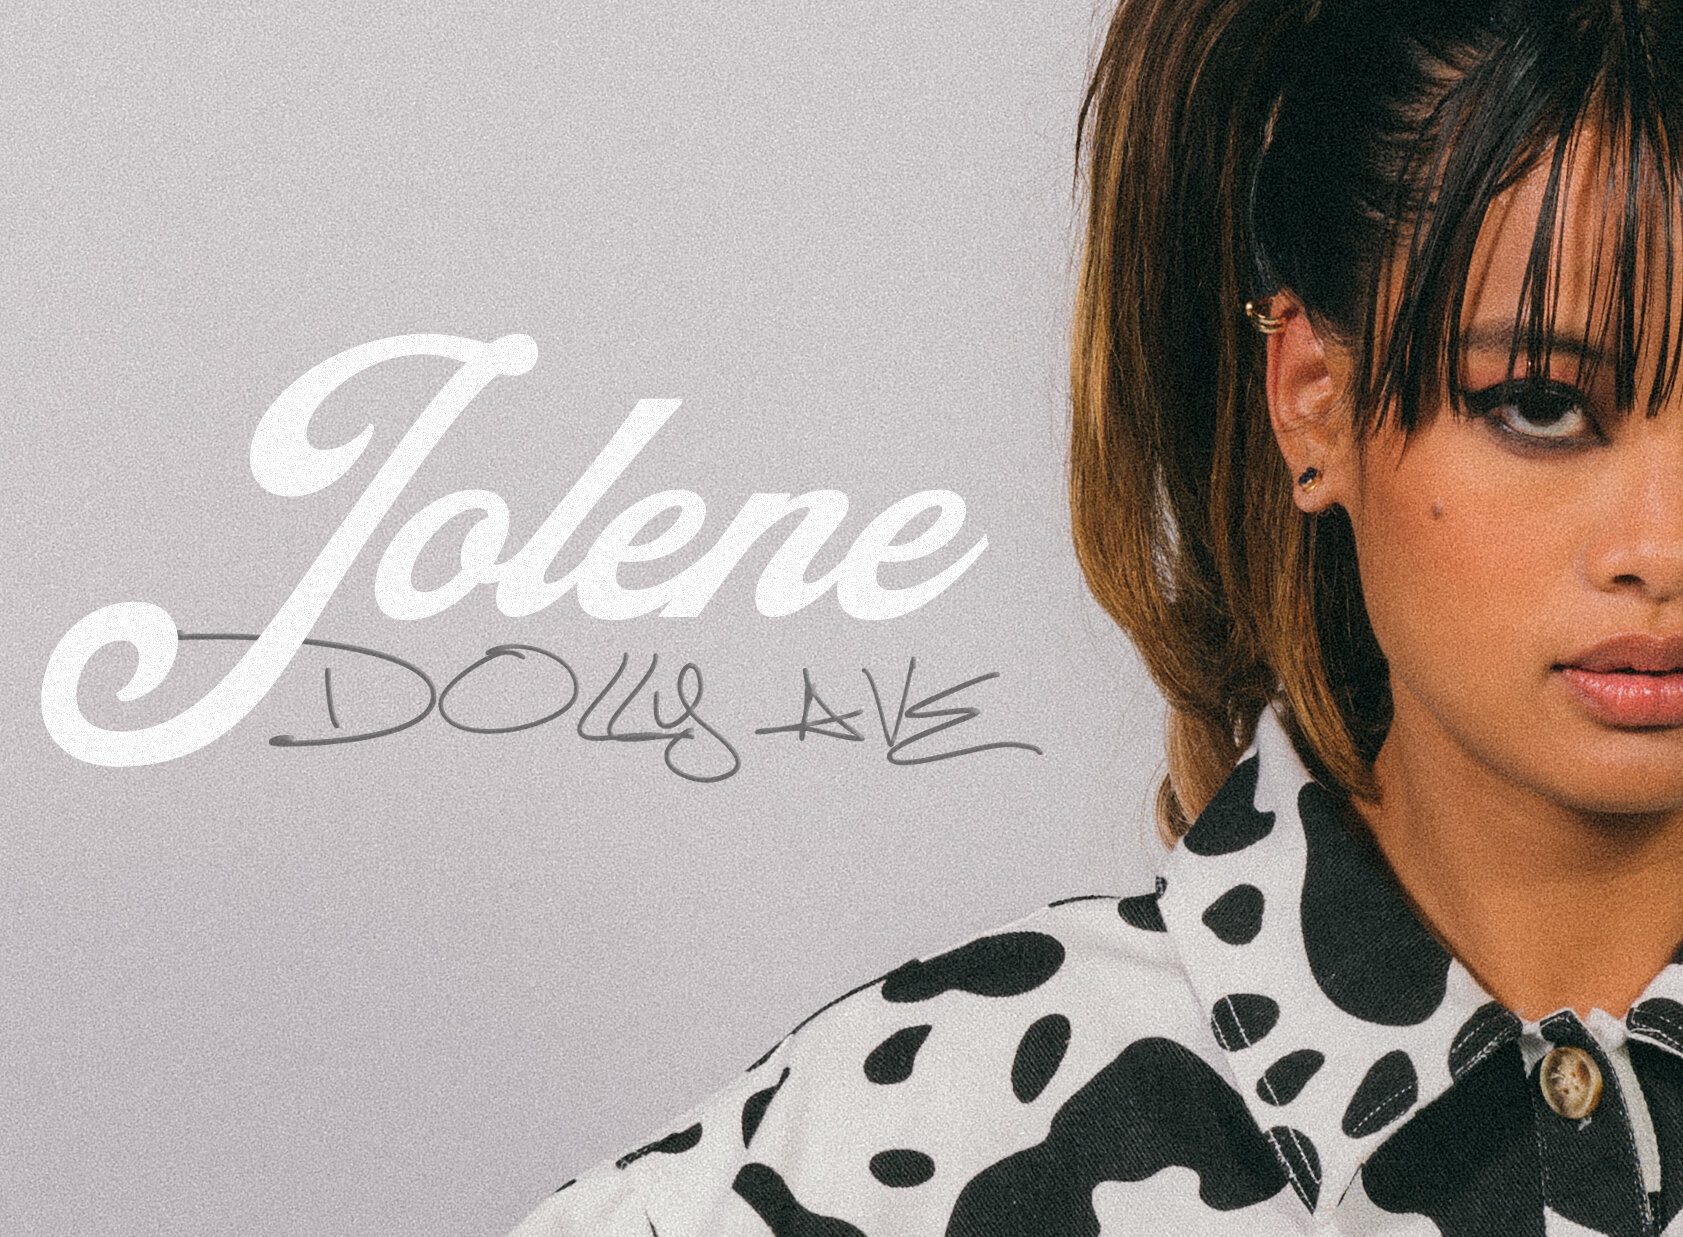 Dolly Ave Pays Homage To The Queen Of Country With Her Dynamic Rendition Of 'Jolene'